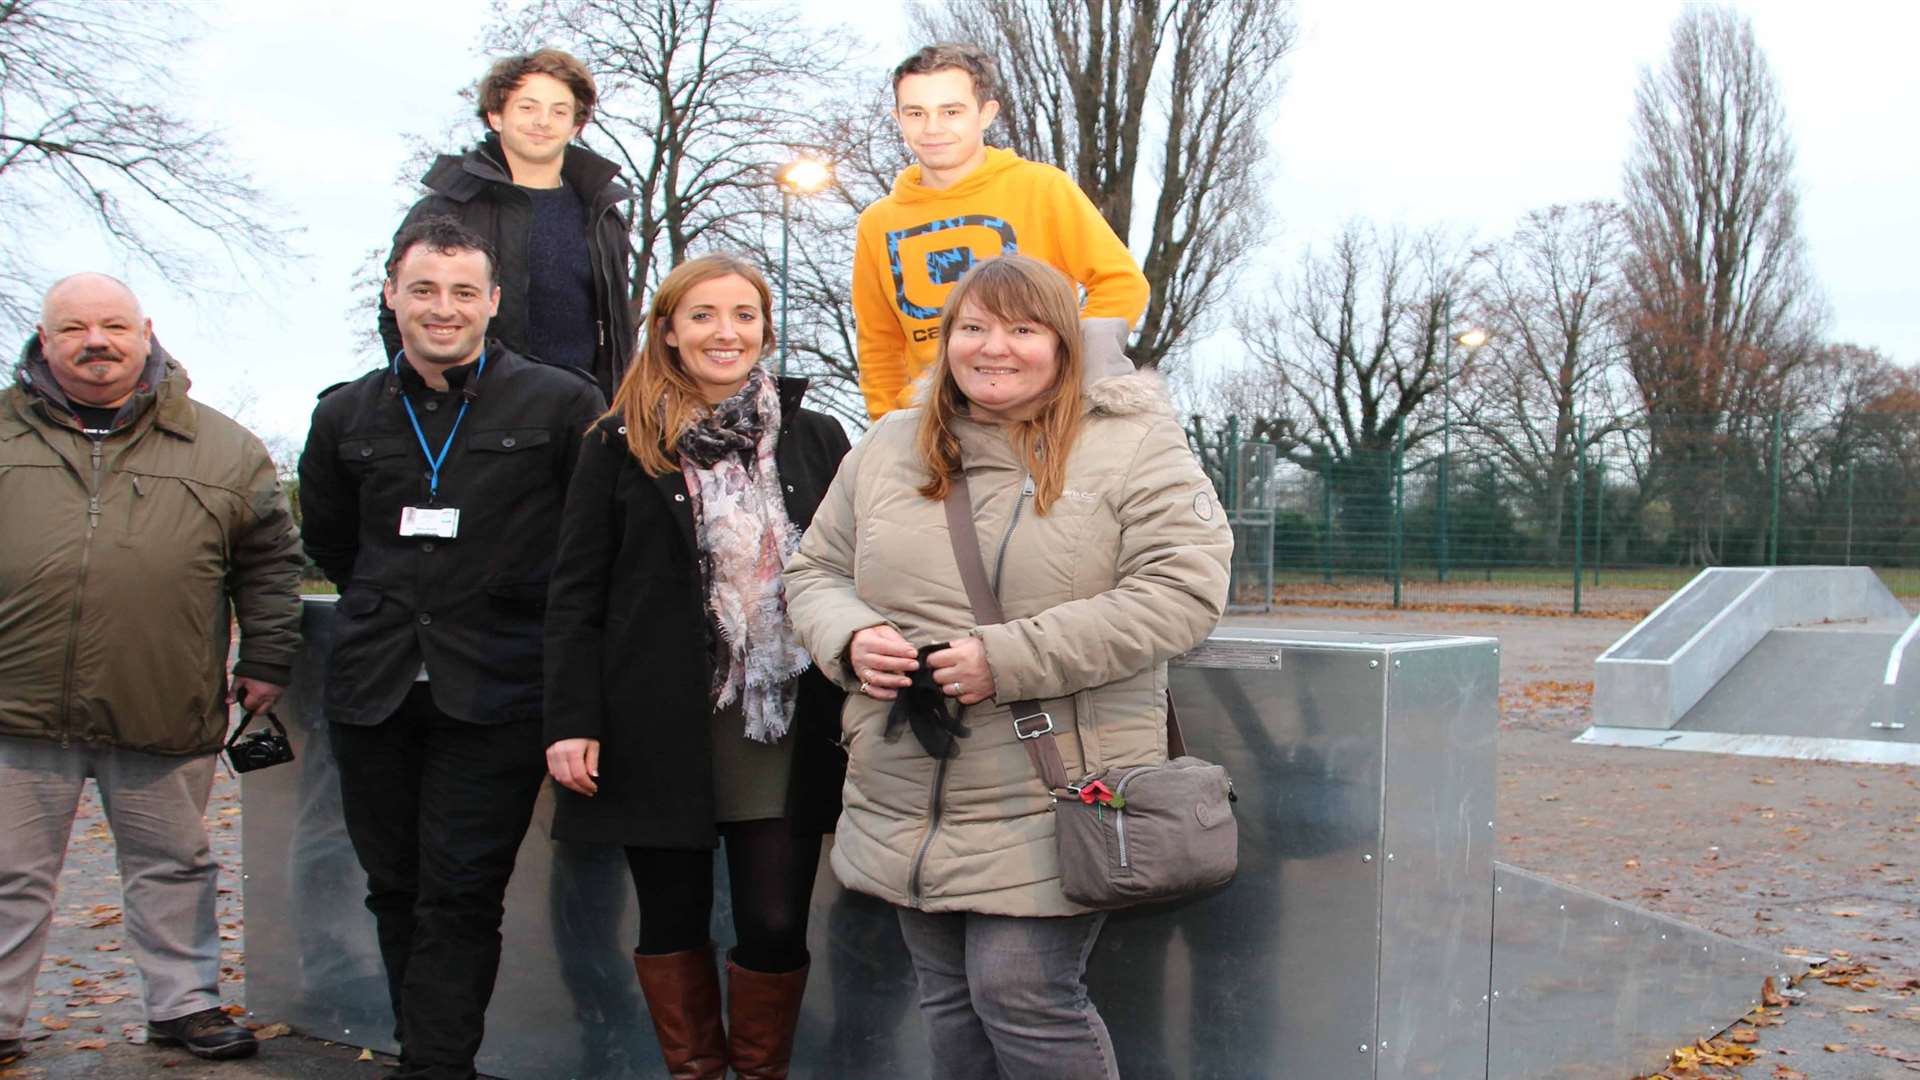 Members of StreetSide Community Group with members of the council at the new look skatepark